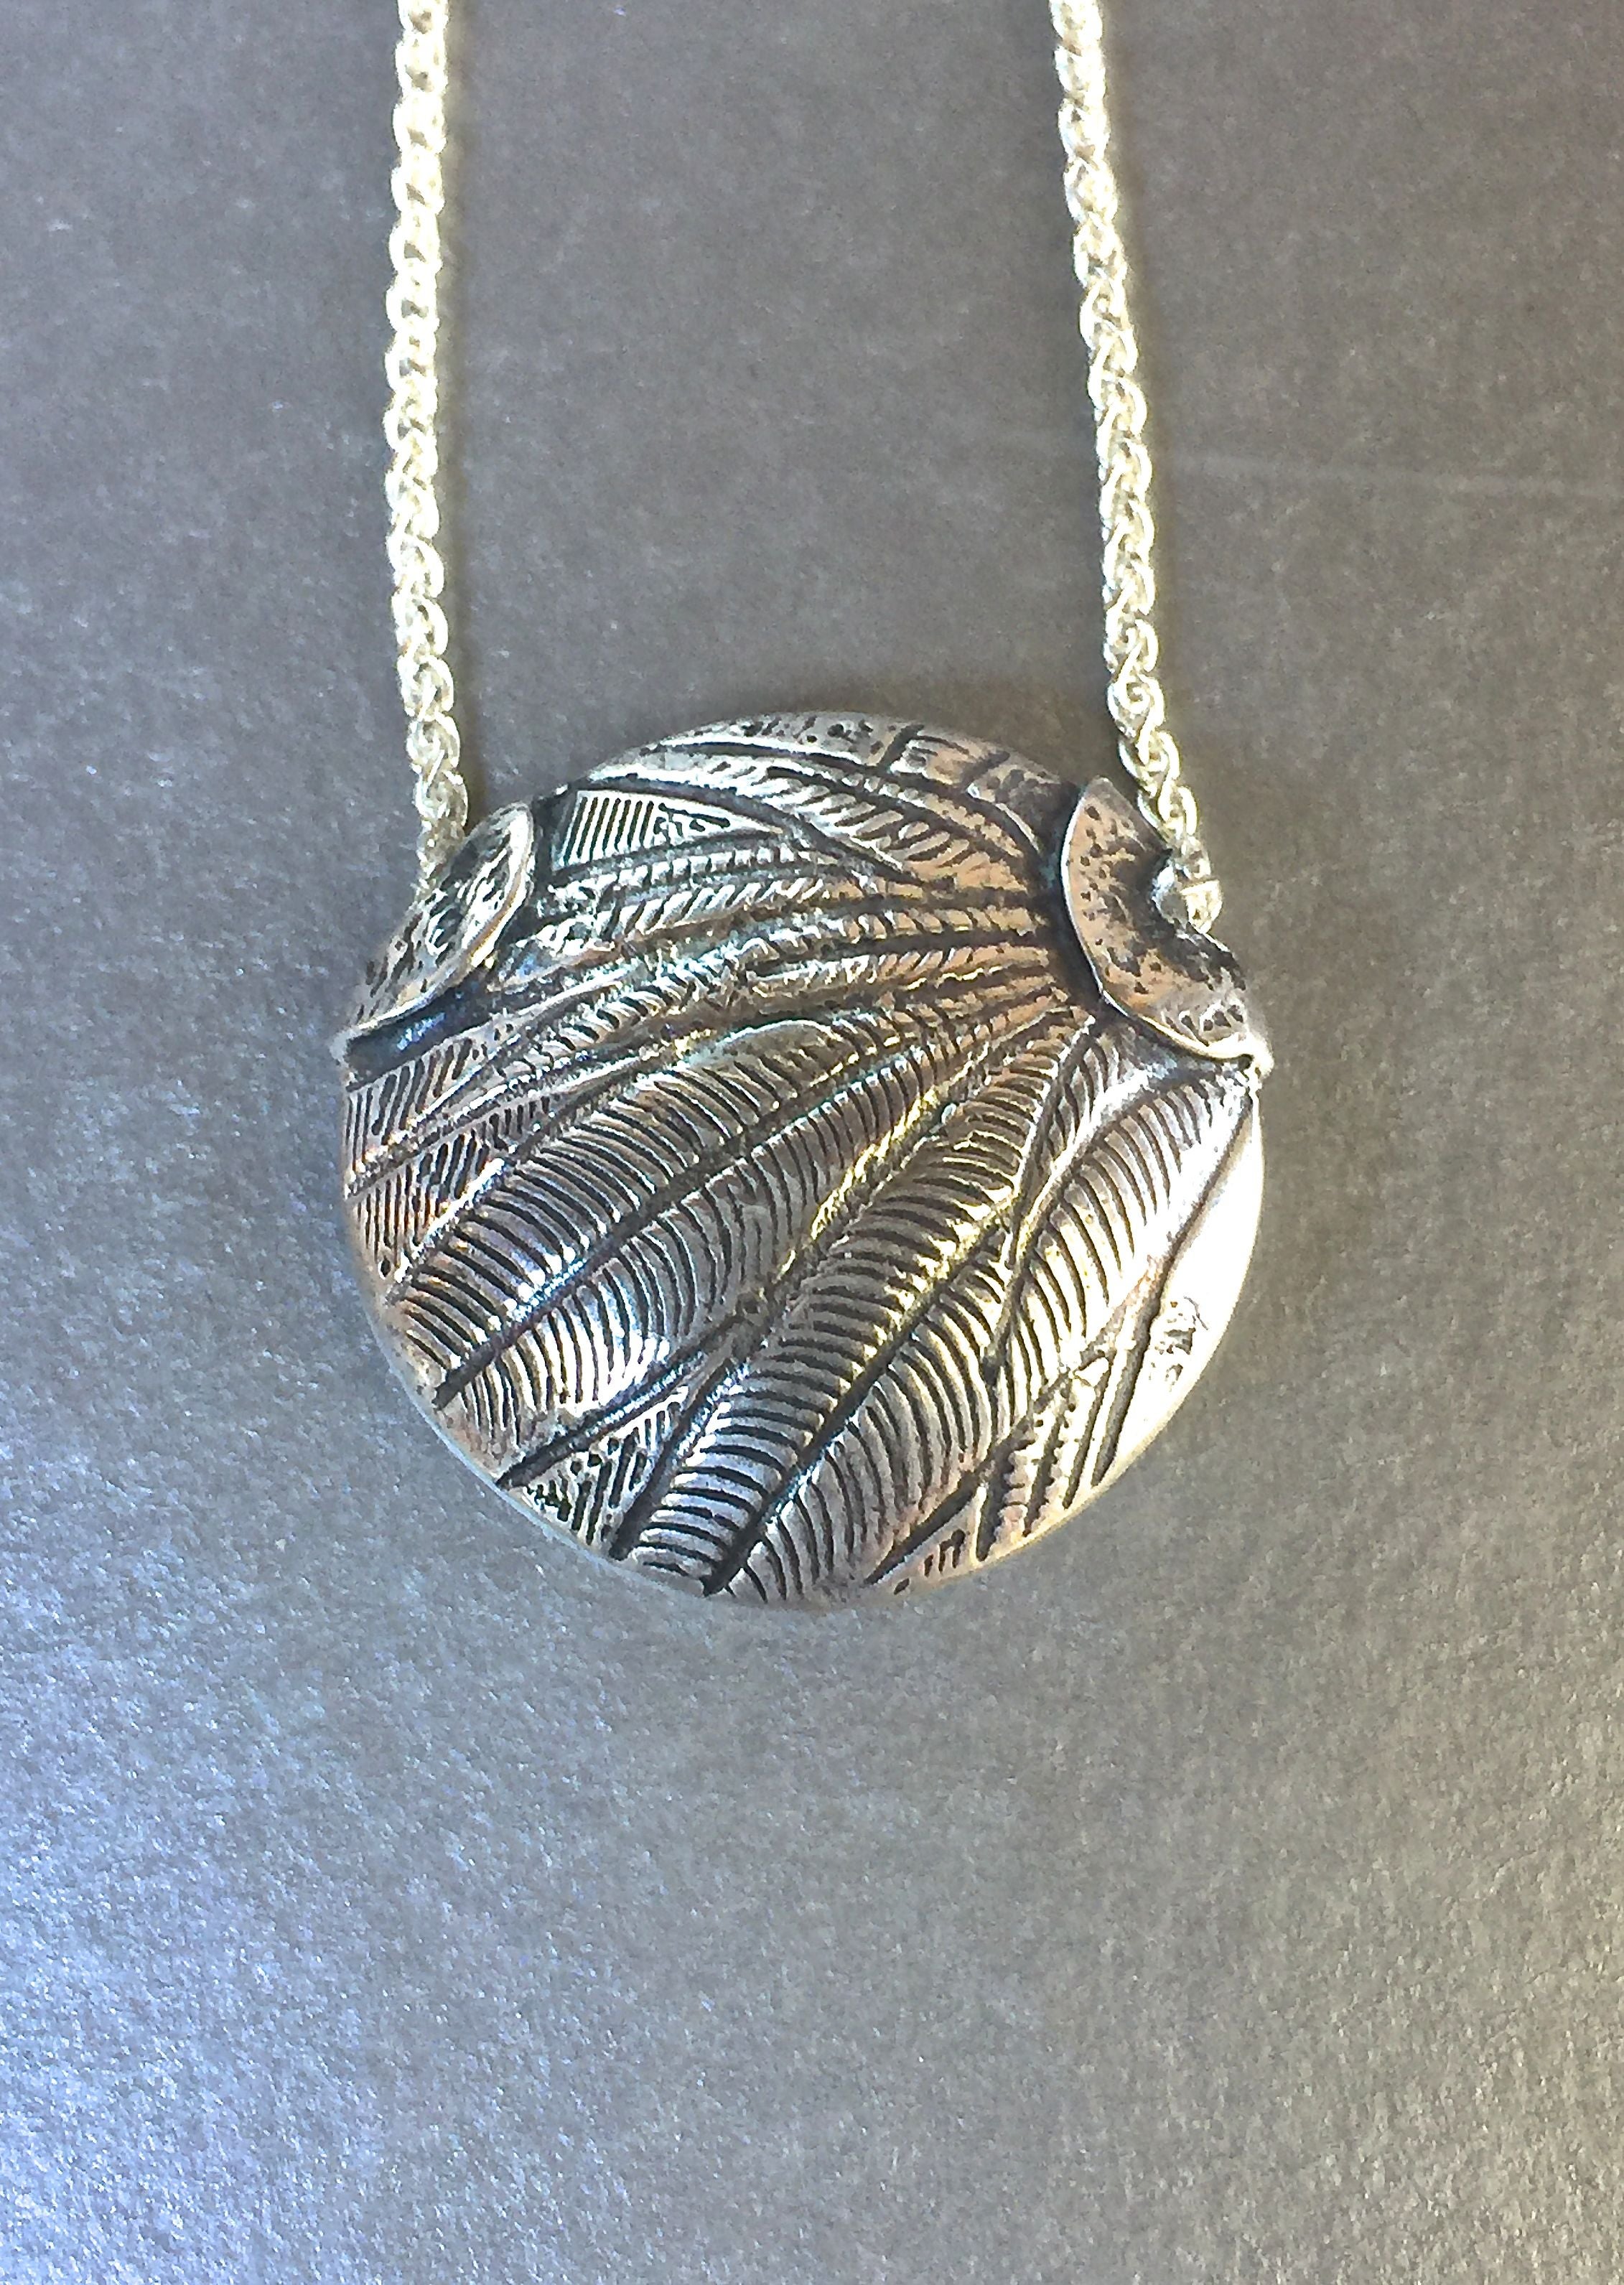 Silver Clay and Dichroic Glass - Silver Clay School